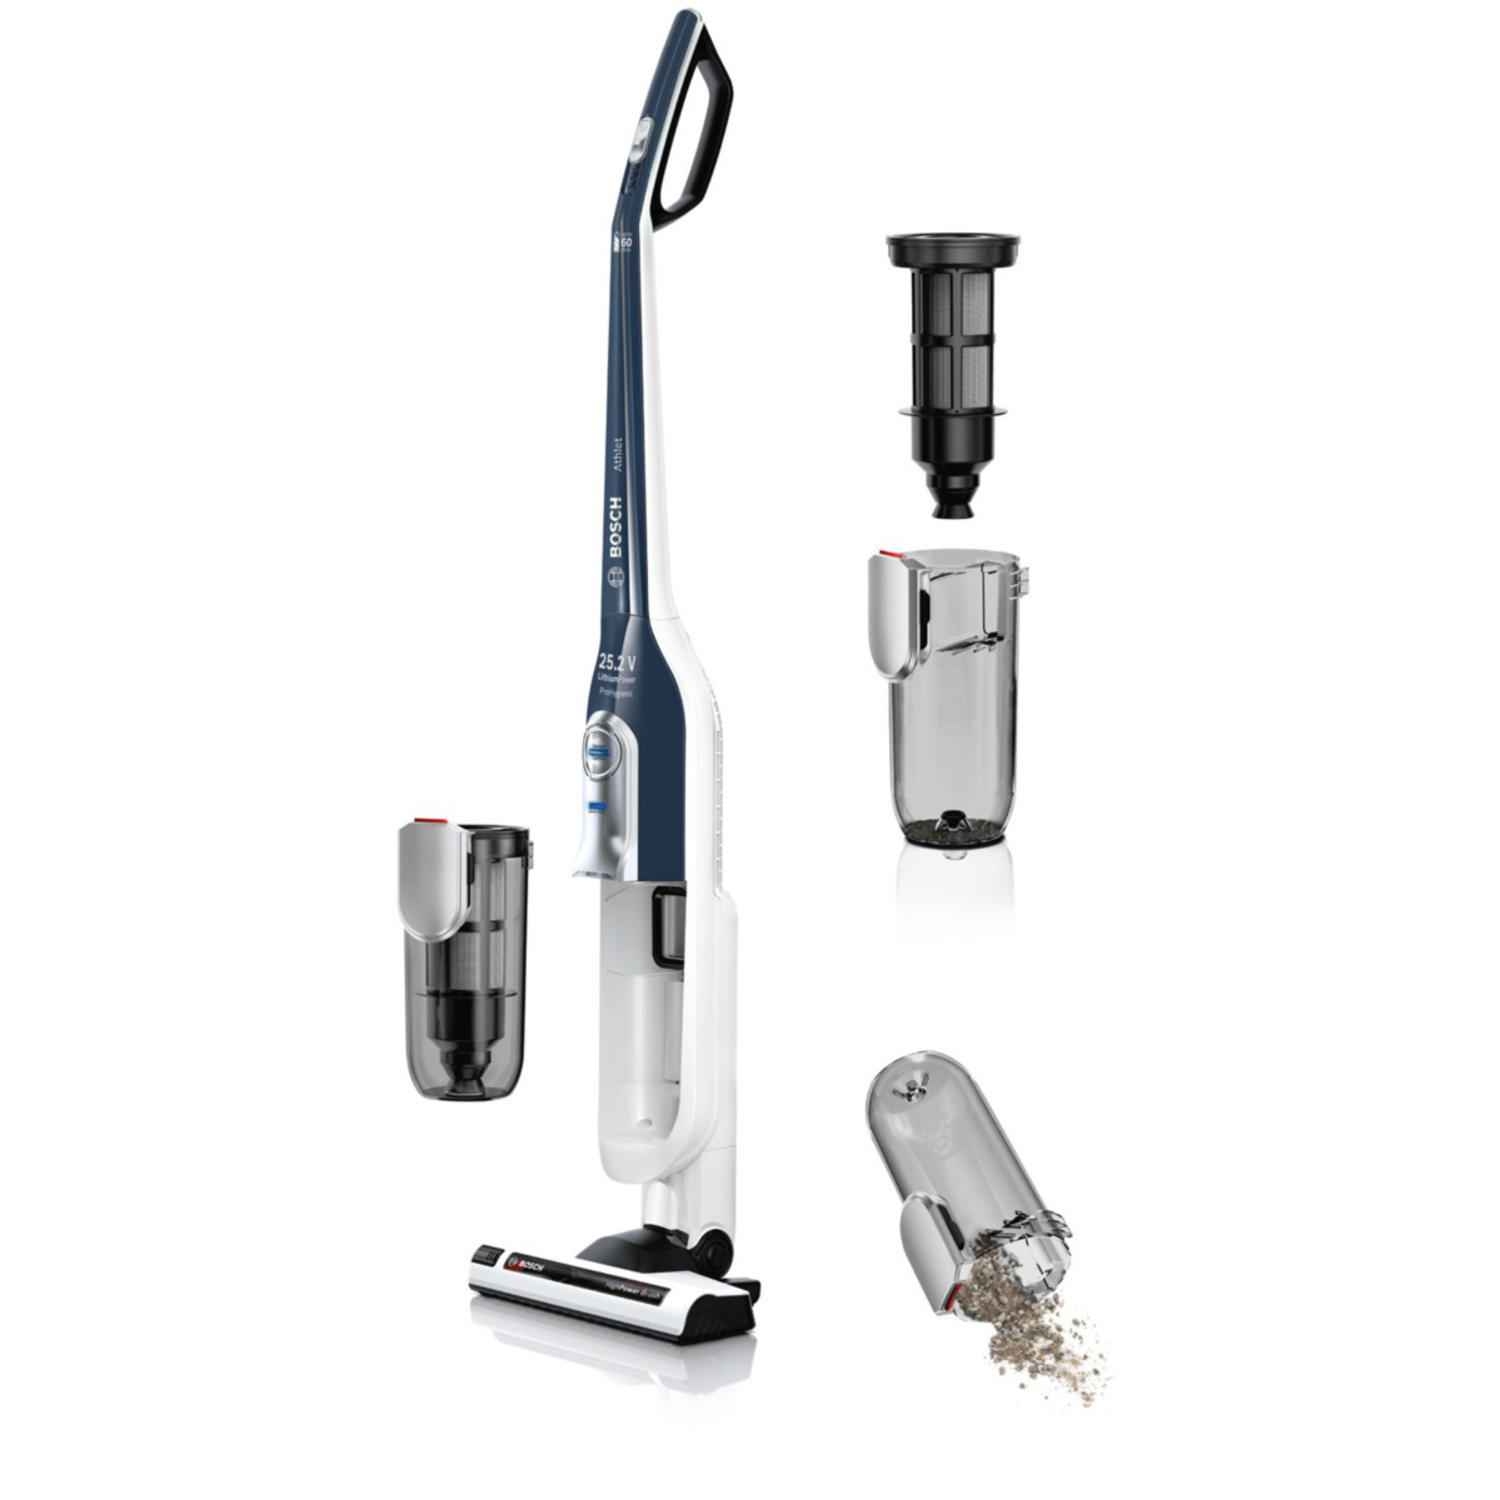 Bosch BCH6HYGGB Athlet ProHygienic Cordless Vacuum Cleaner - White - 60 Minute Run Time - 7